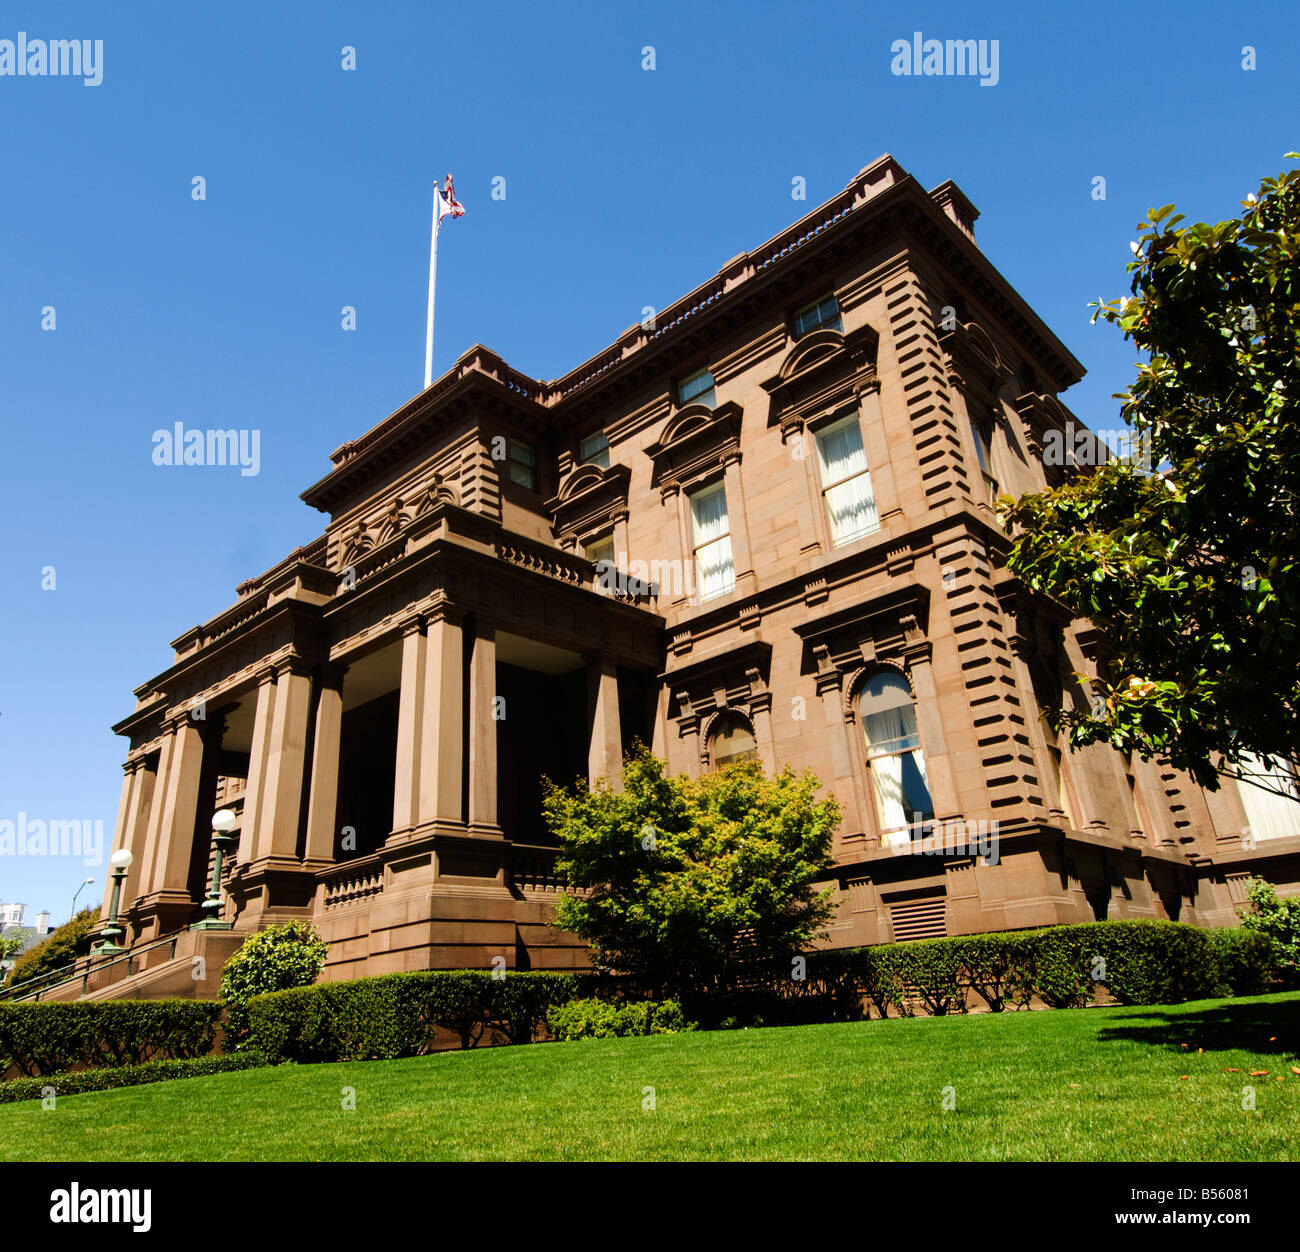 California San Francisco The Flood Mansion, a prominent Victorian architectural legacy on Nob Hill. Stock Photo